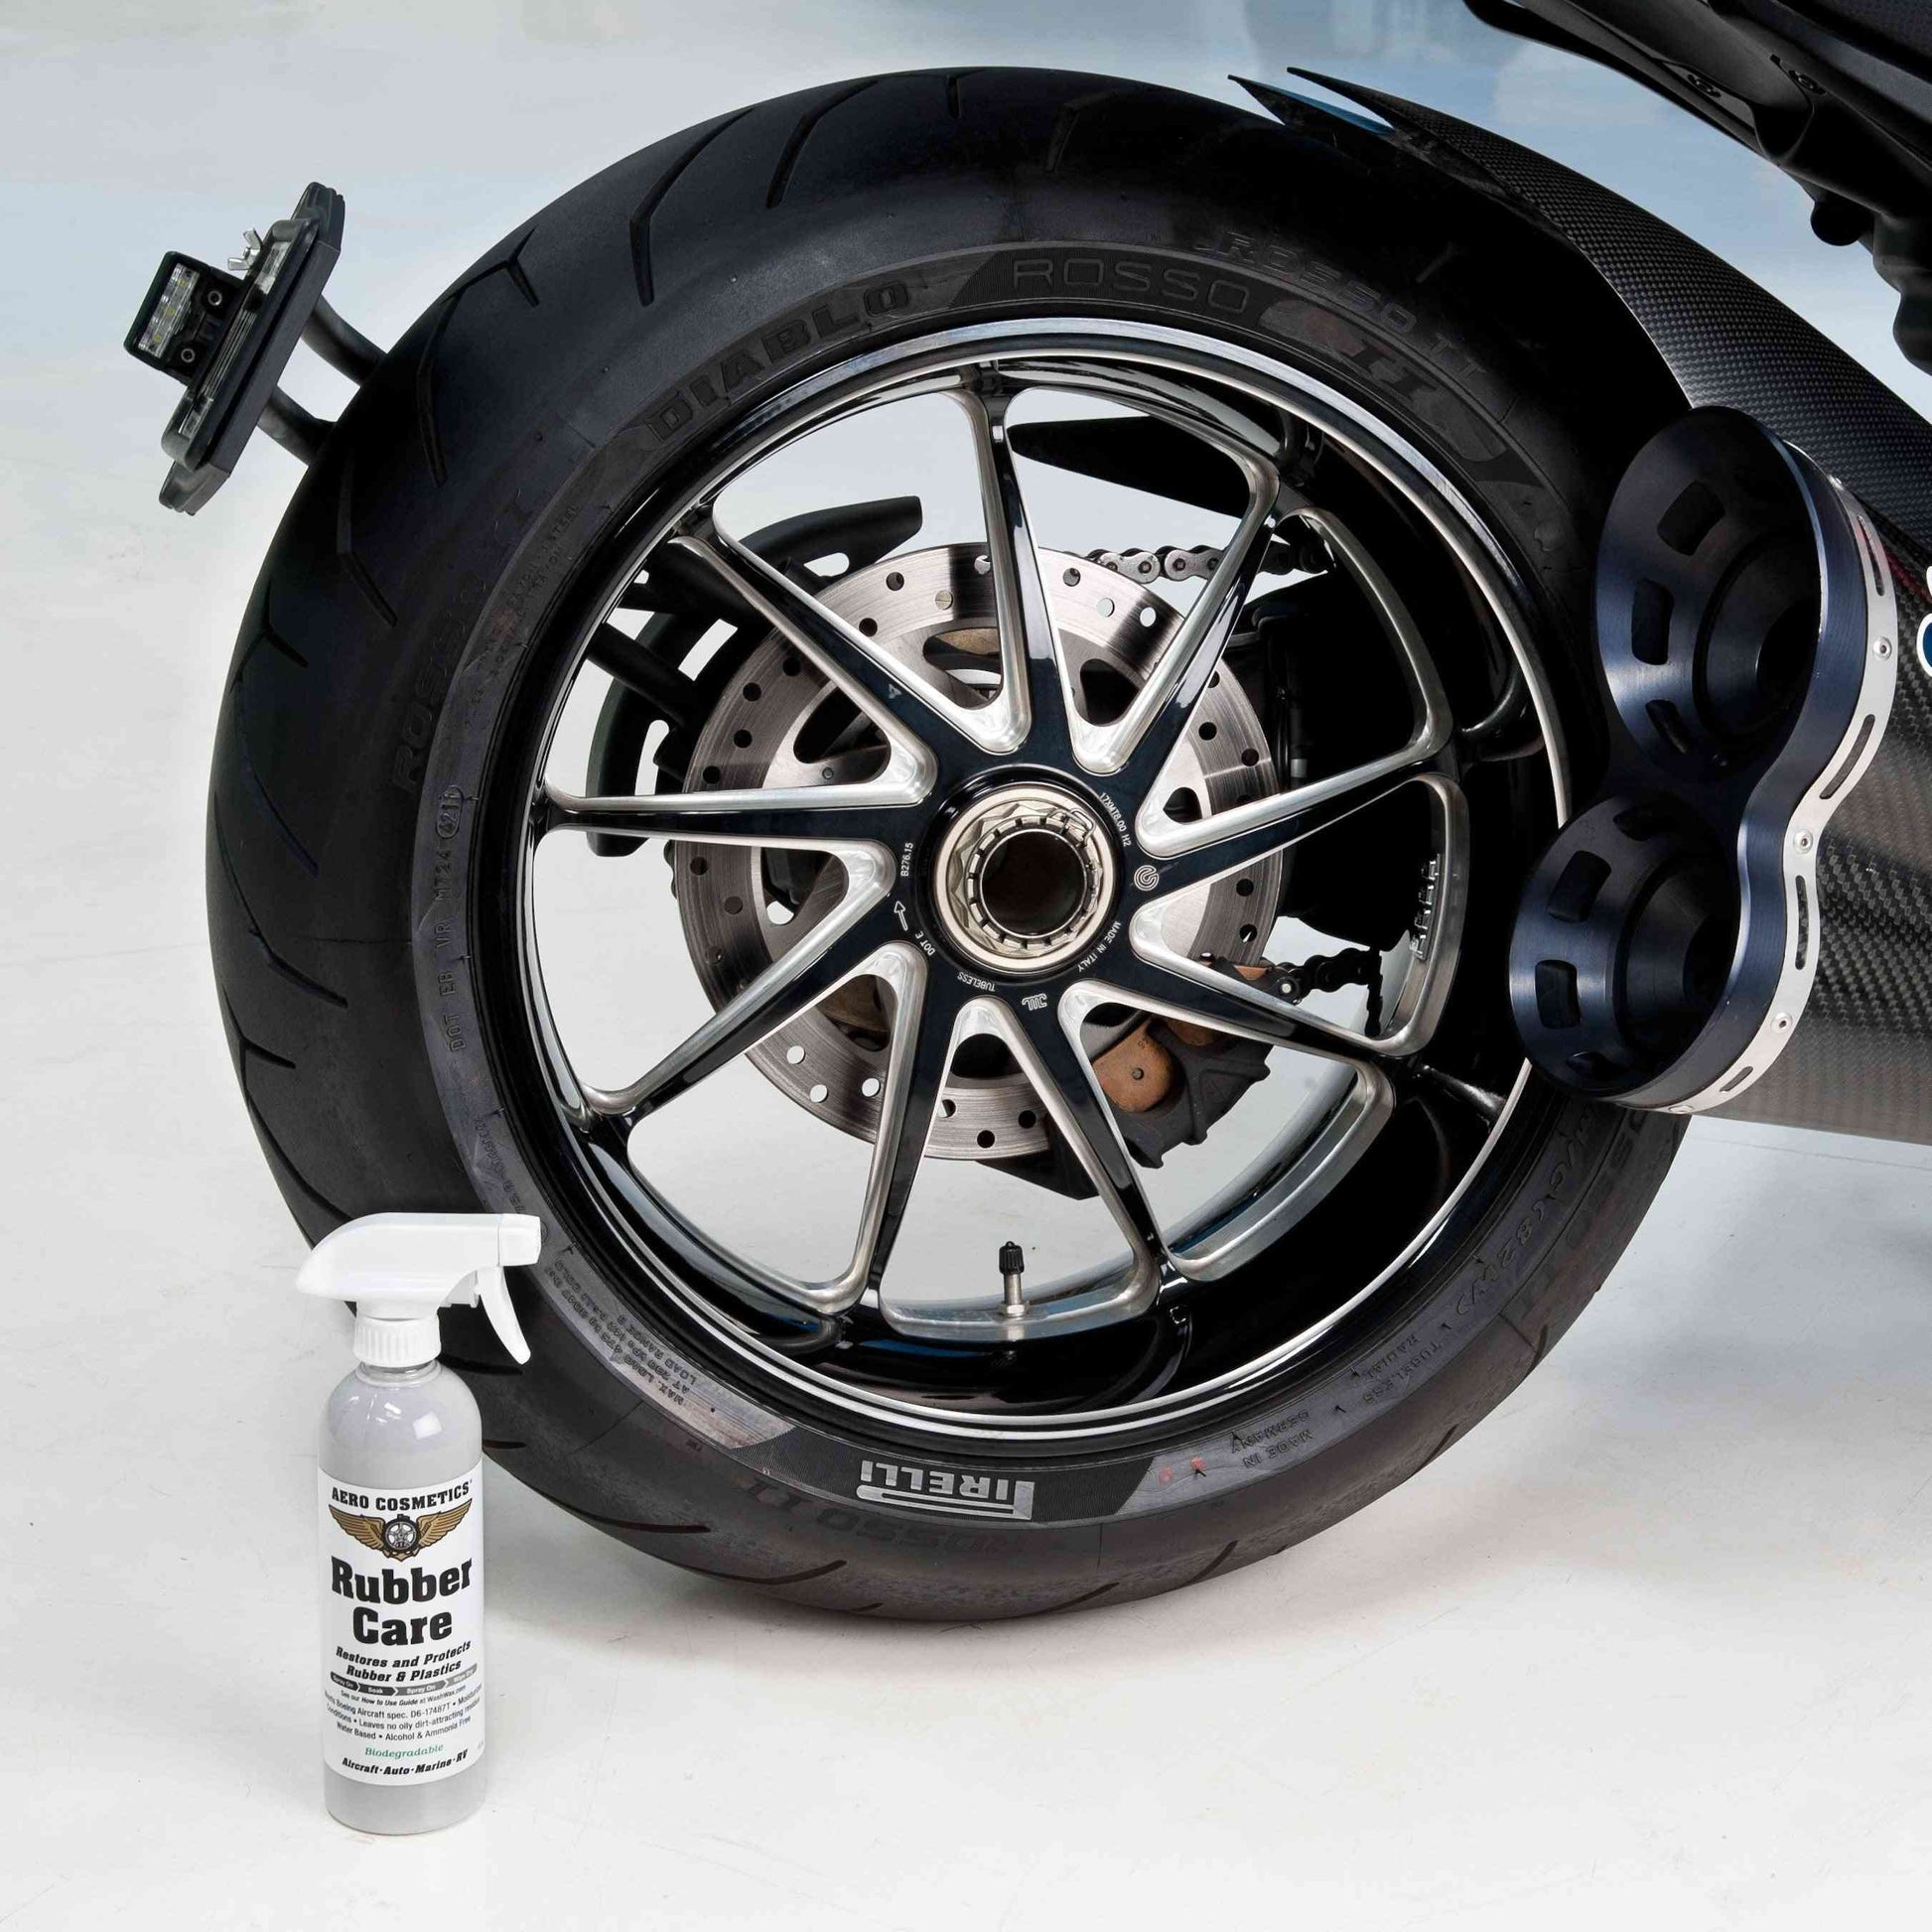 Tire Care Kit, Aircraft Quality Products for your Car, RV and Motorcycle Aero Cosmetics